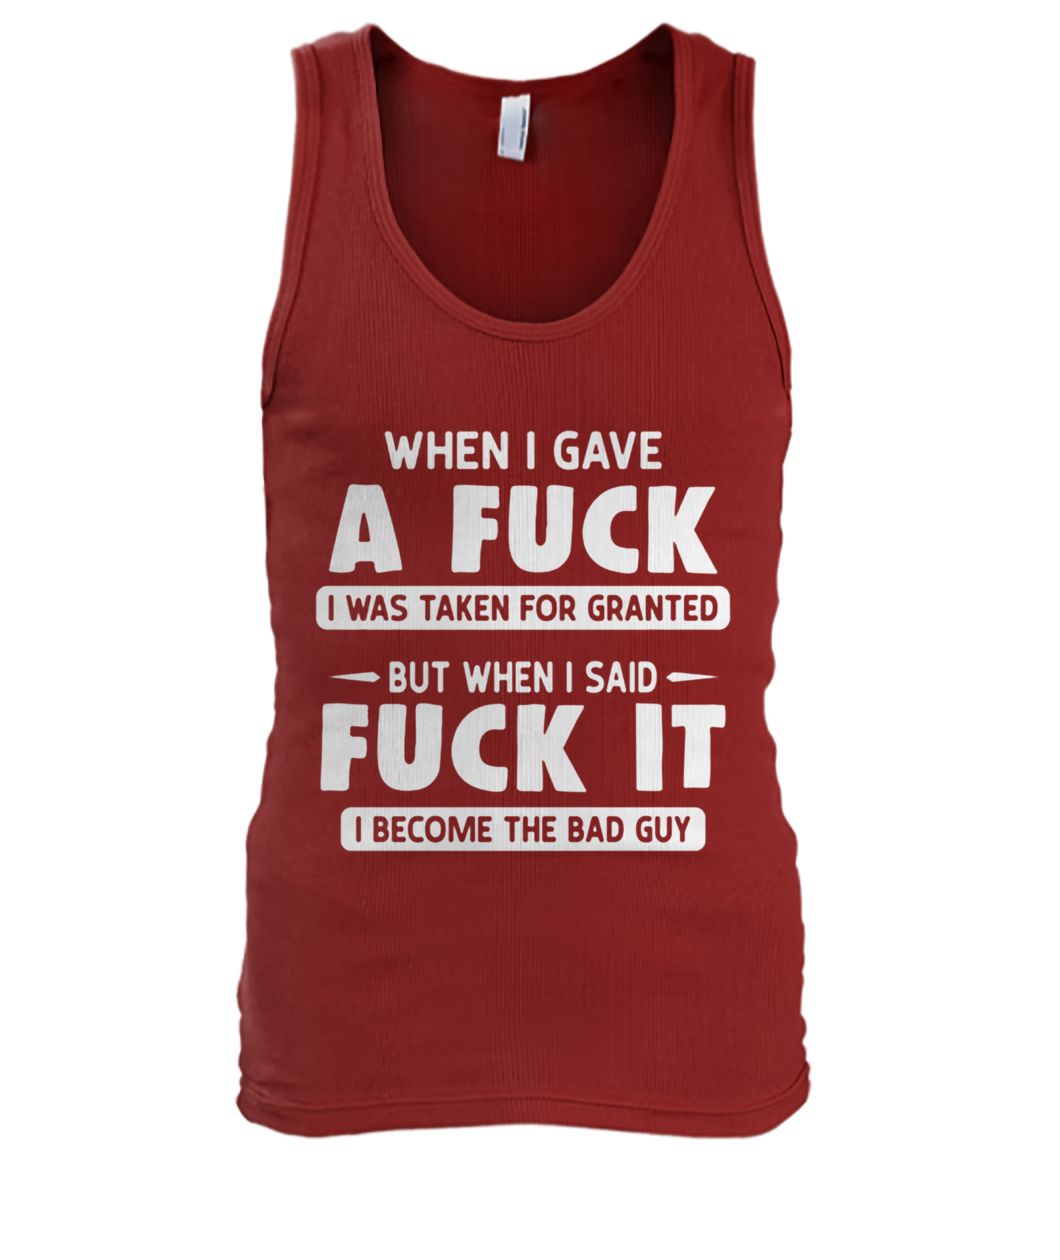 When I gave a fuck I was taken for granted but when I said fuck it I become the bad guy men's tank top